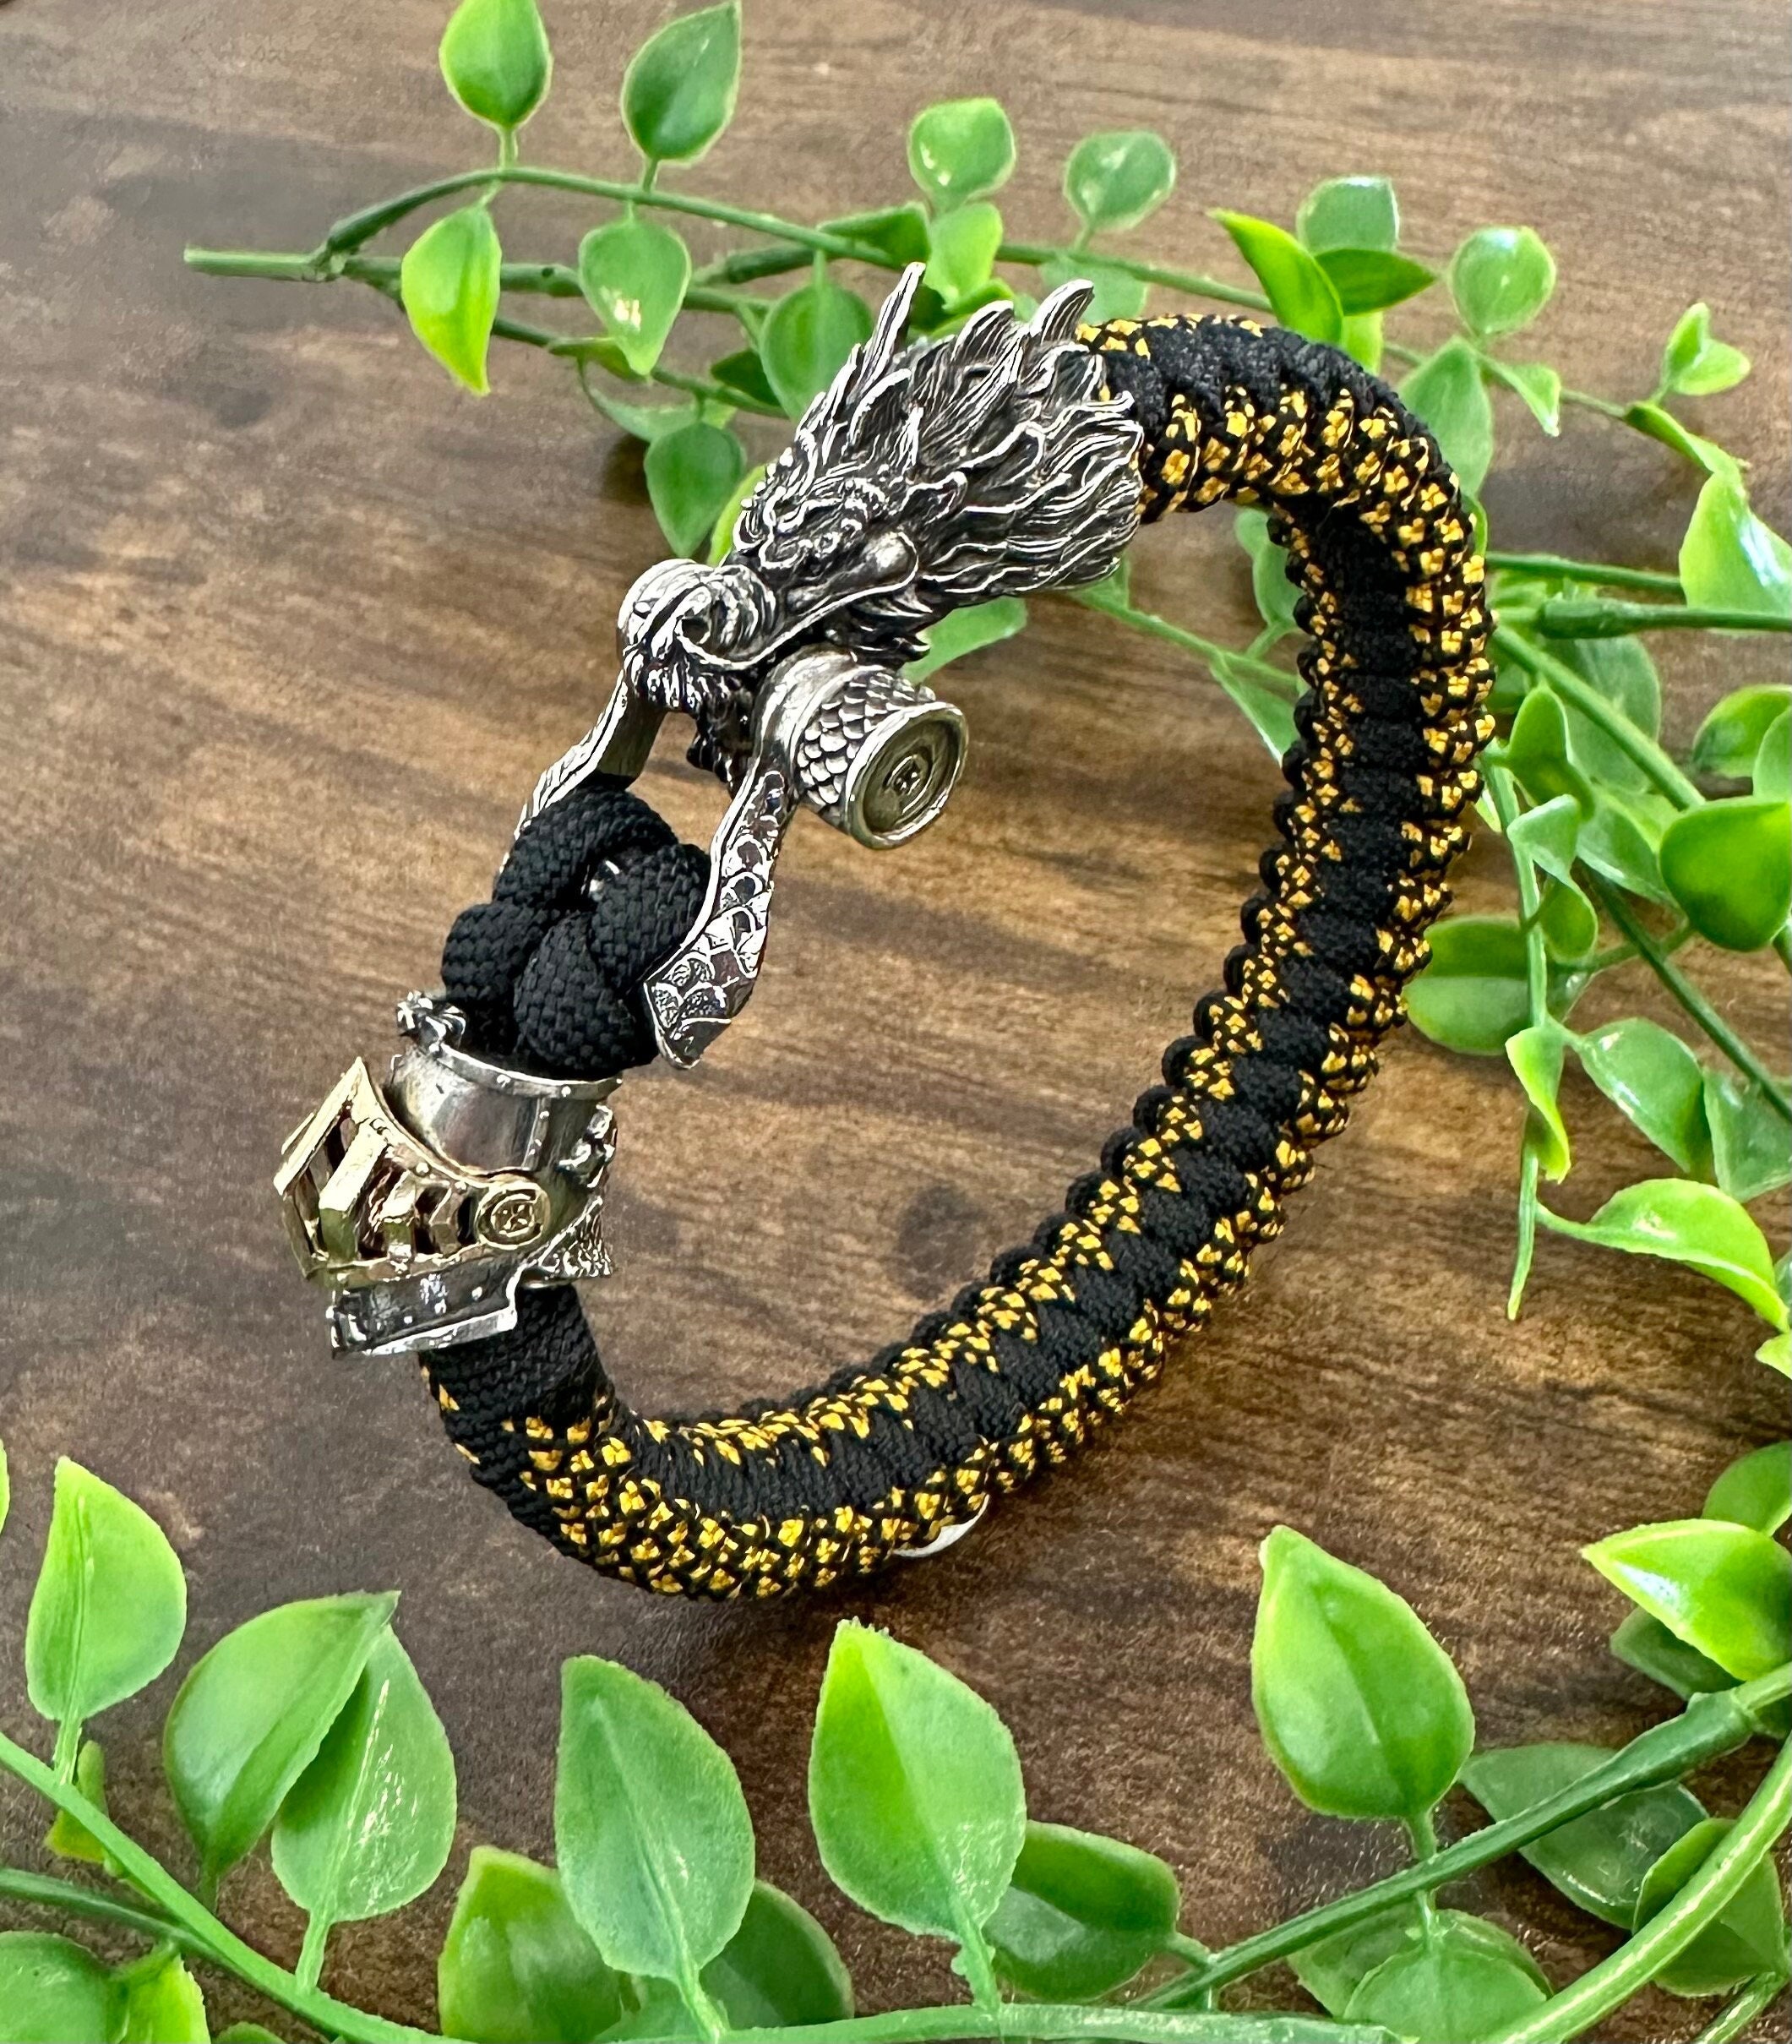 Make your own paracord survival bracelets and fobs with this easy